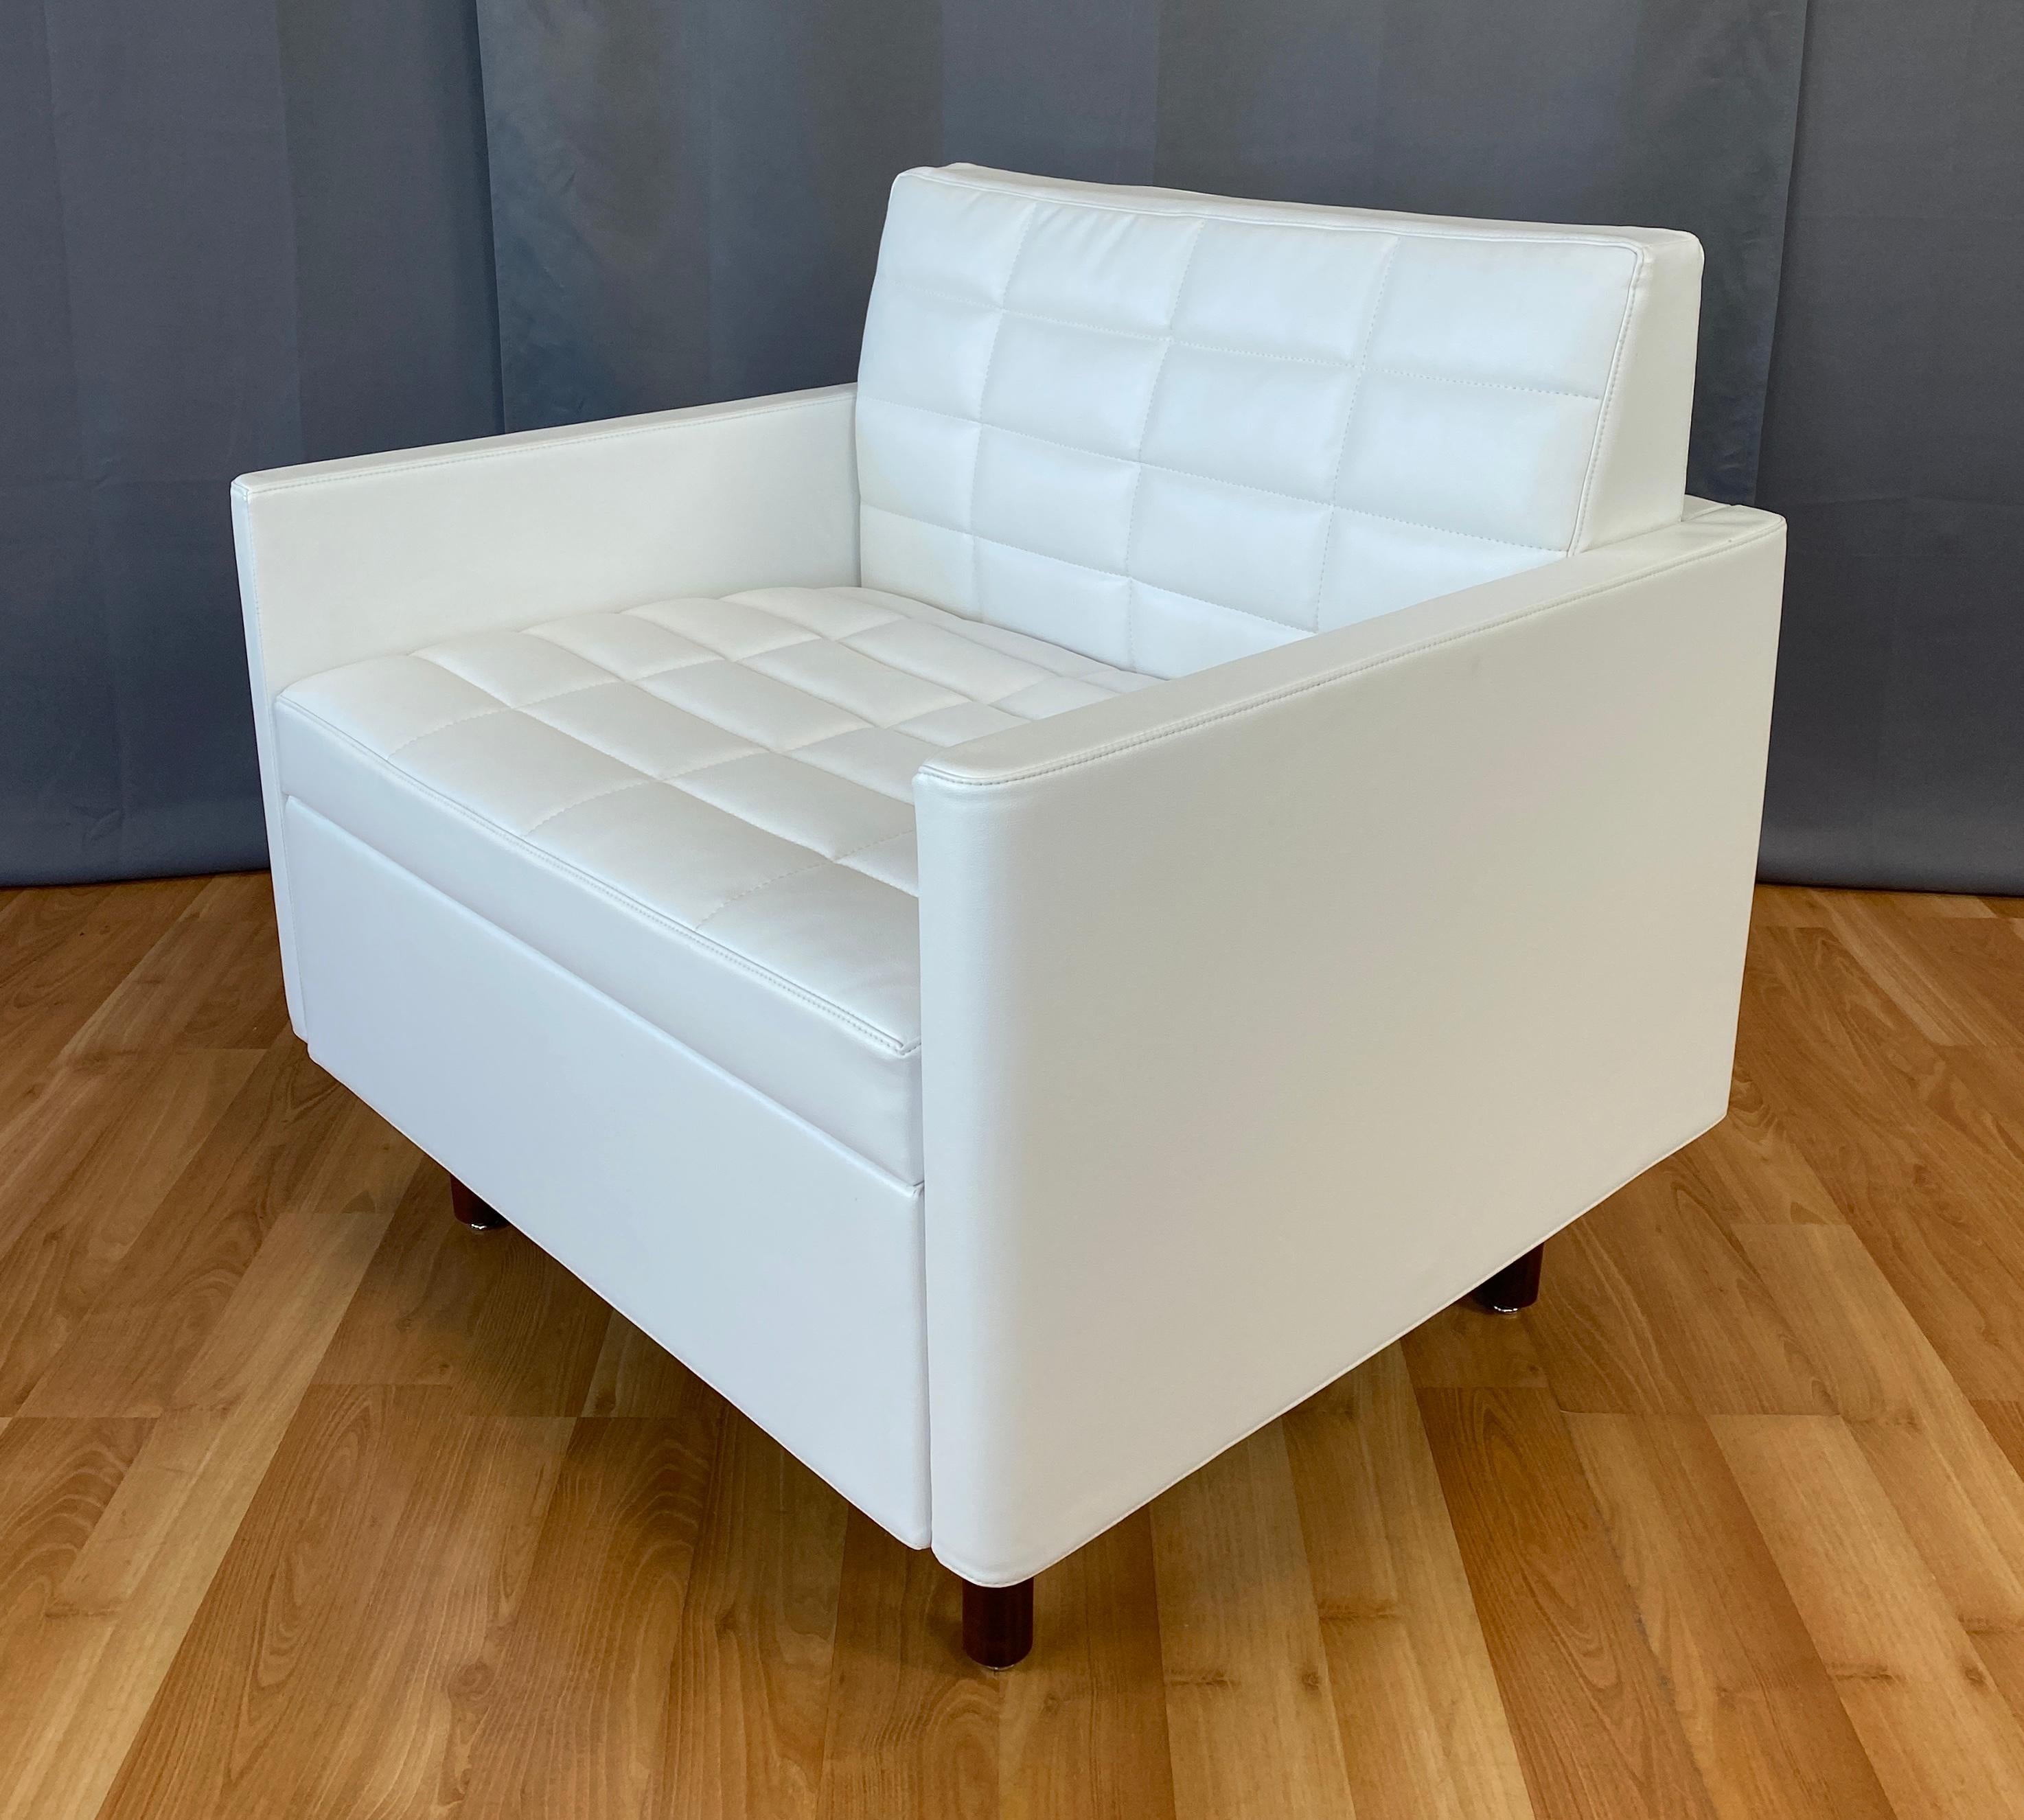 Offered here is a tuxedo Classic club chair quilted, in white leather, designed by BassamFellows (Craig Bassam & Scott Fellows) for Geiger.
A Herman Miller Company.
From Geiger's web site...
